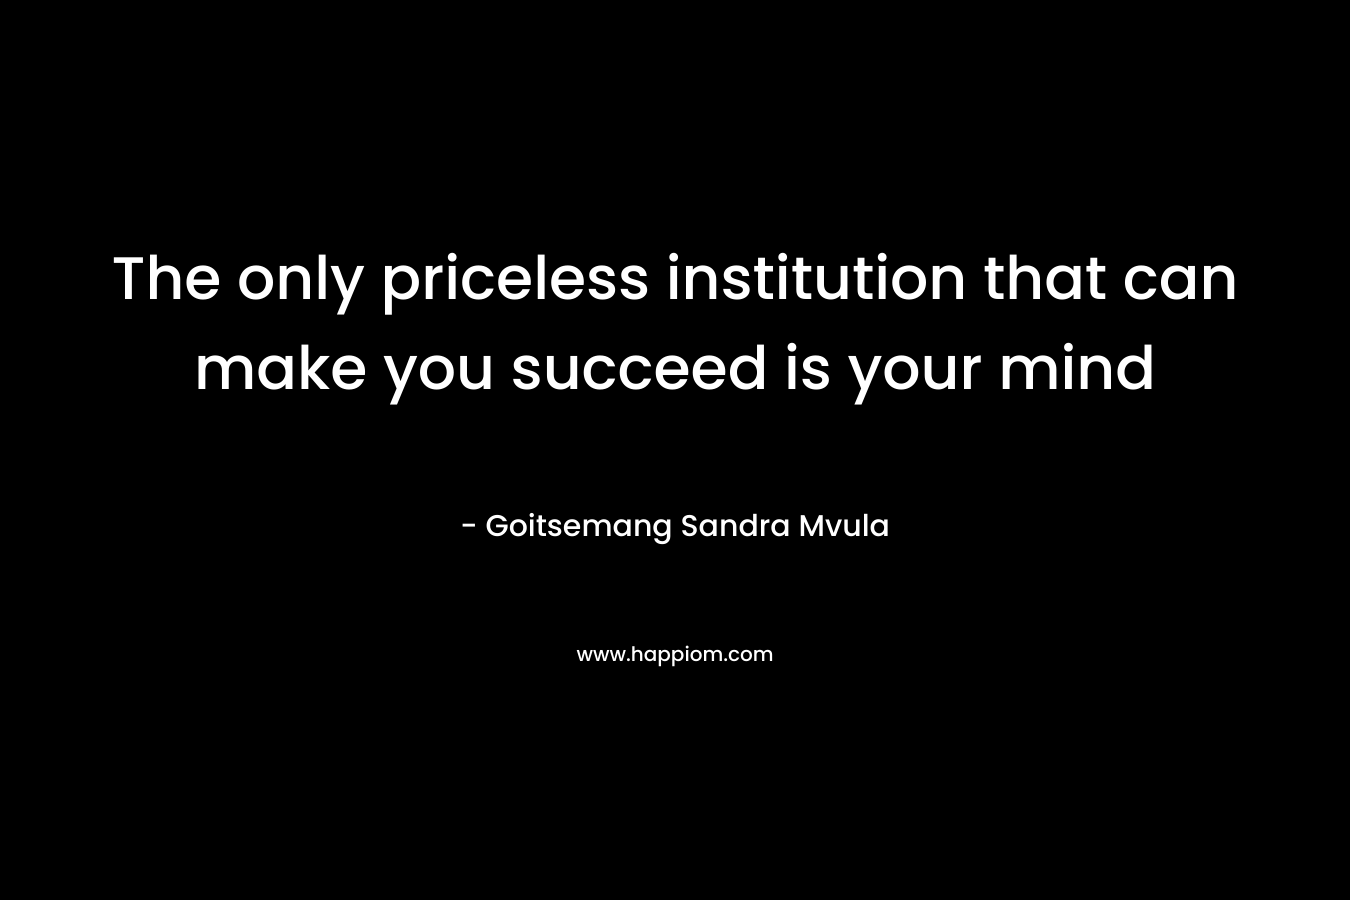 The only priceless institution that can make you succeed is your mind